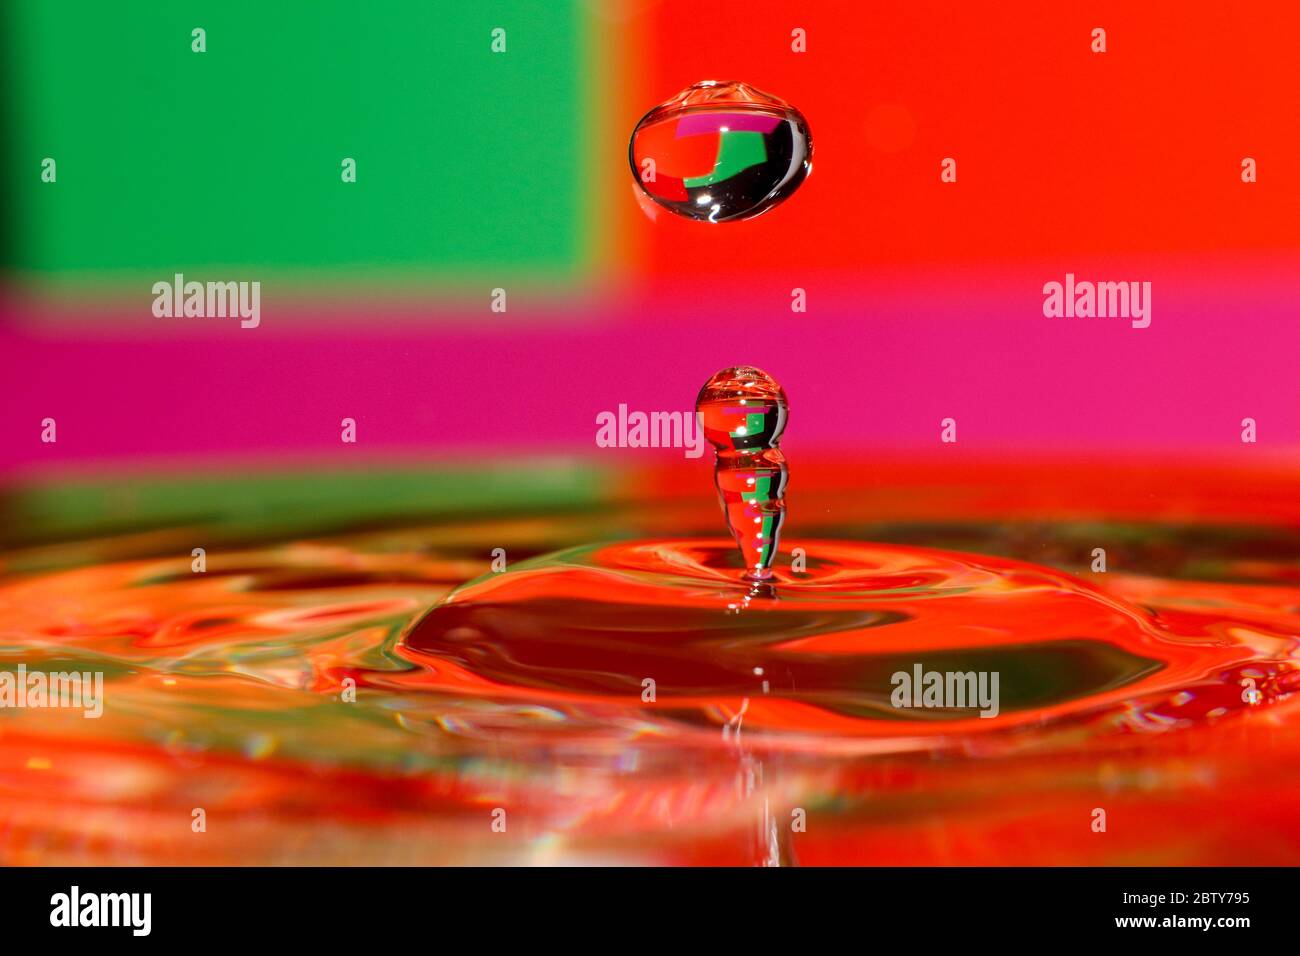 Drop of water with red green background Stock Photo